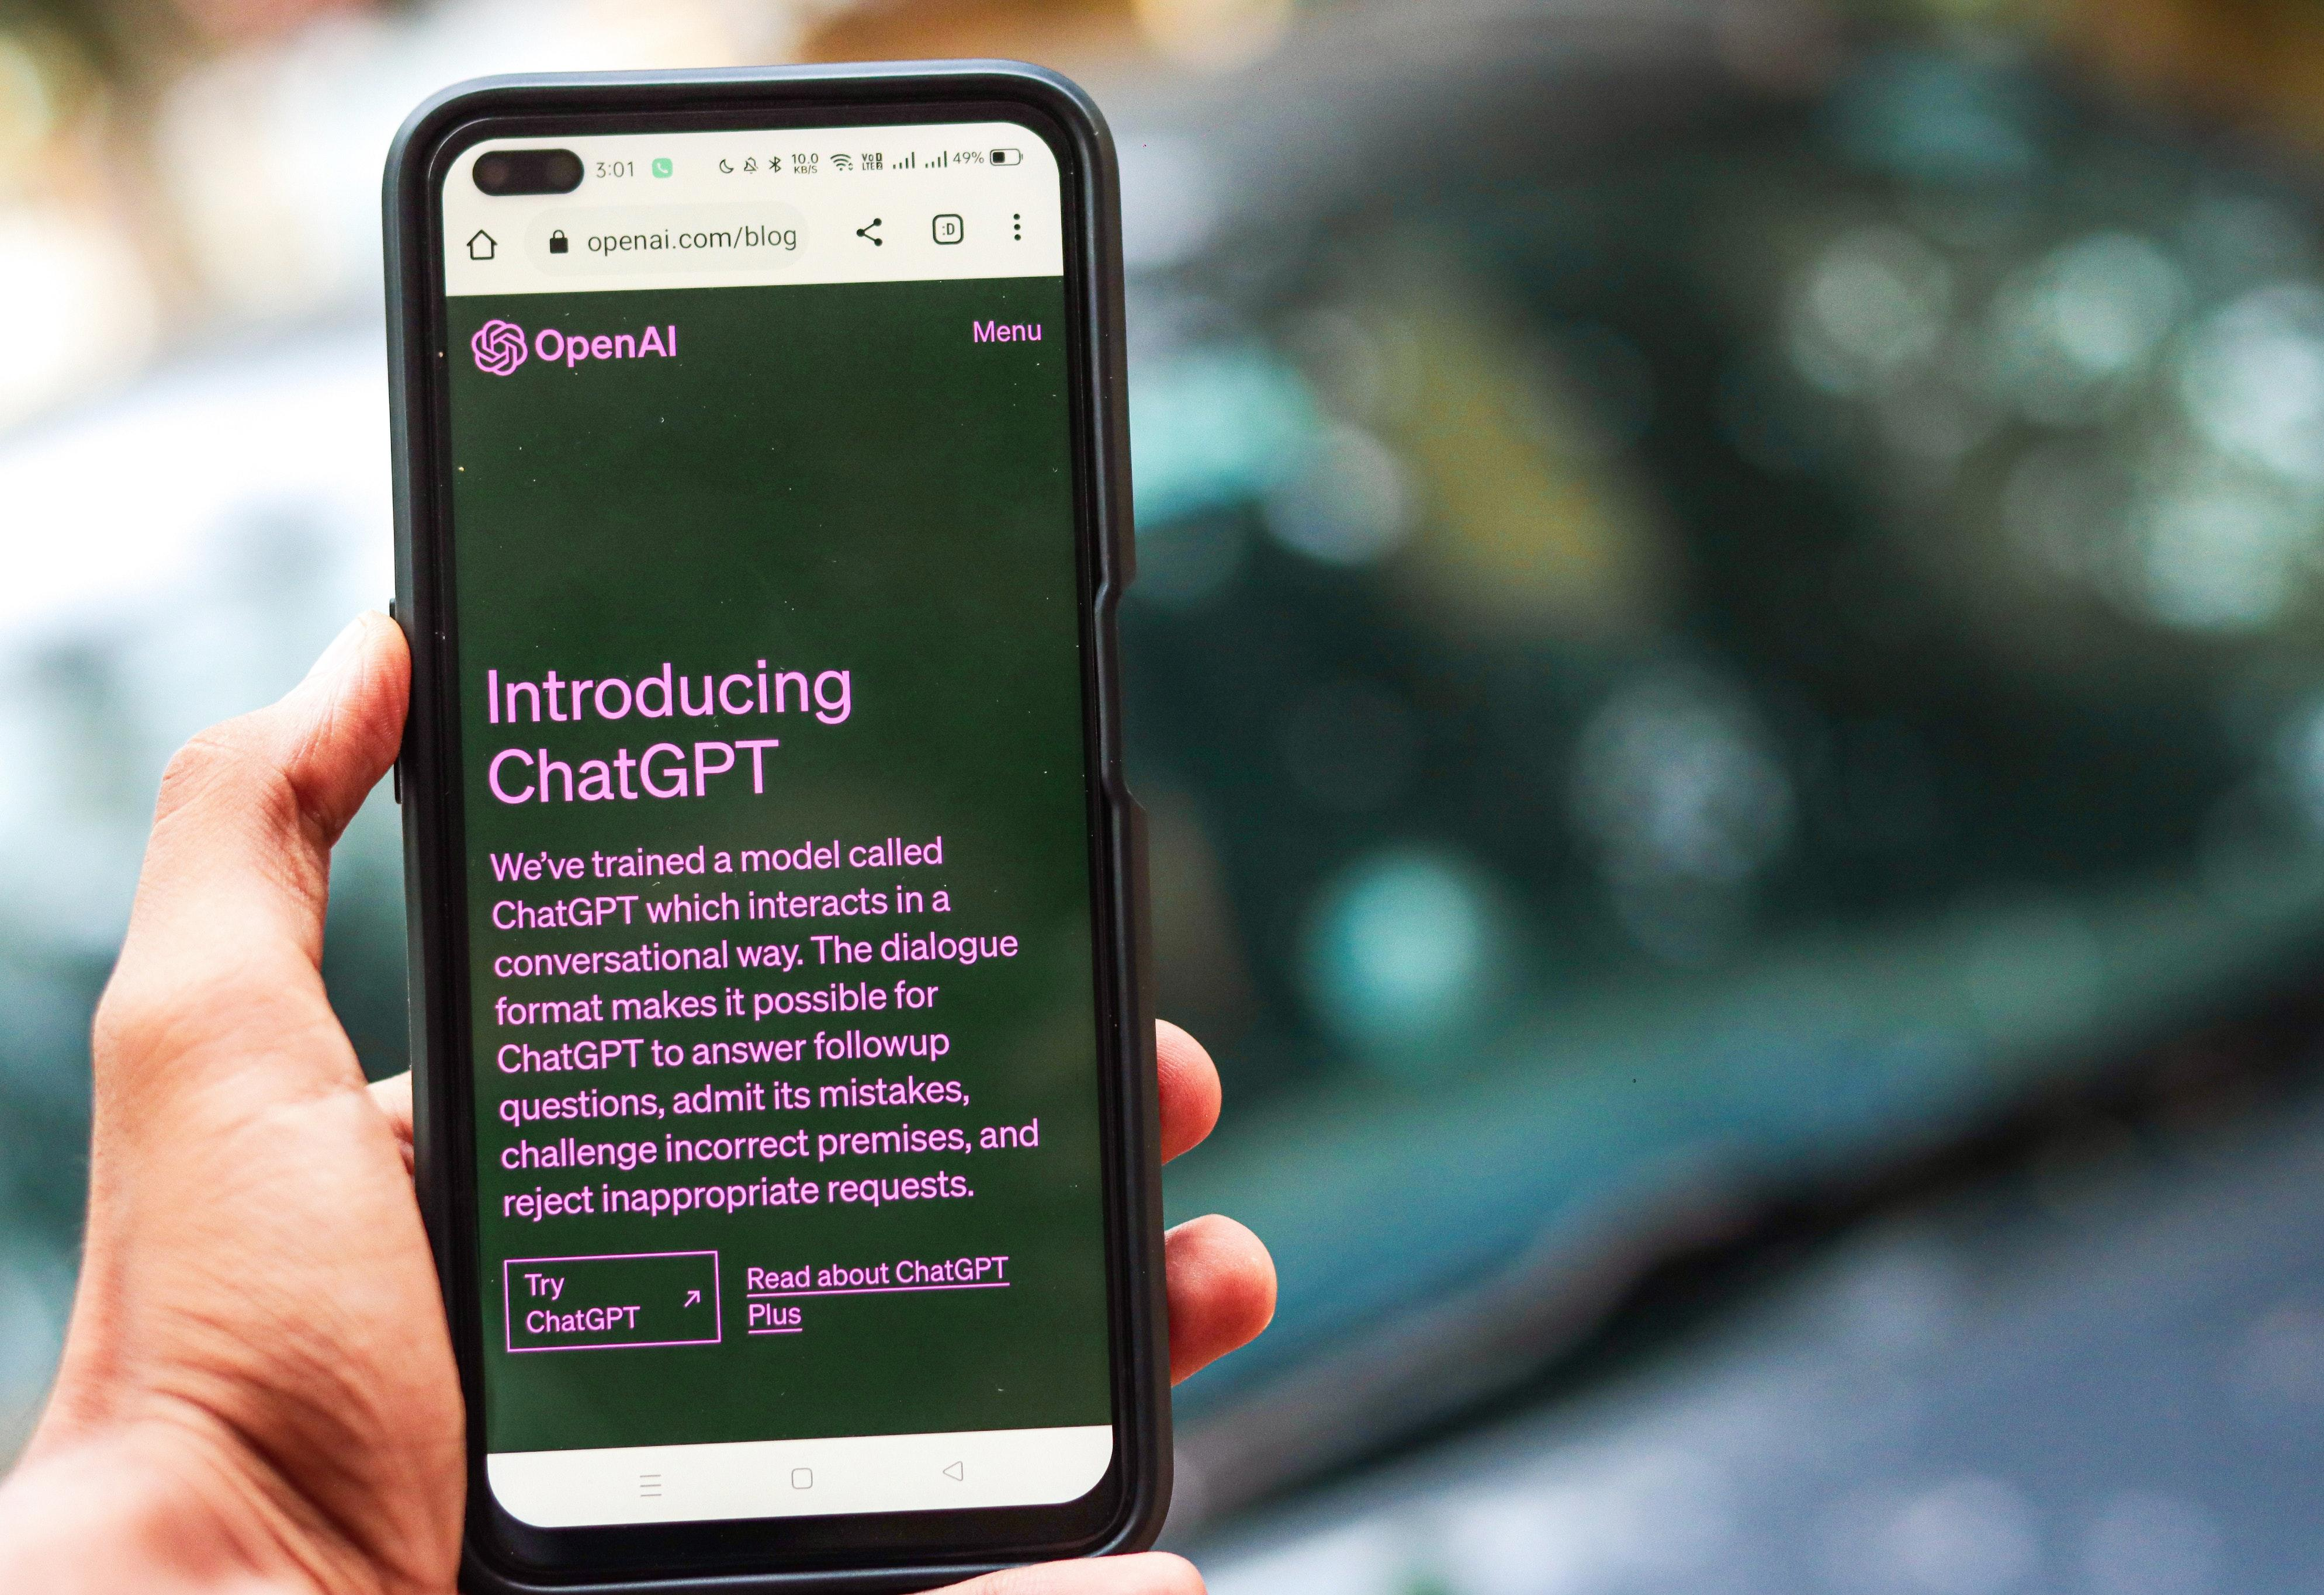 Warning: Don’t Download the ChatGPT Mobile App